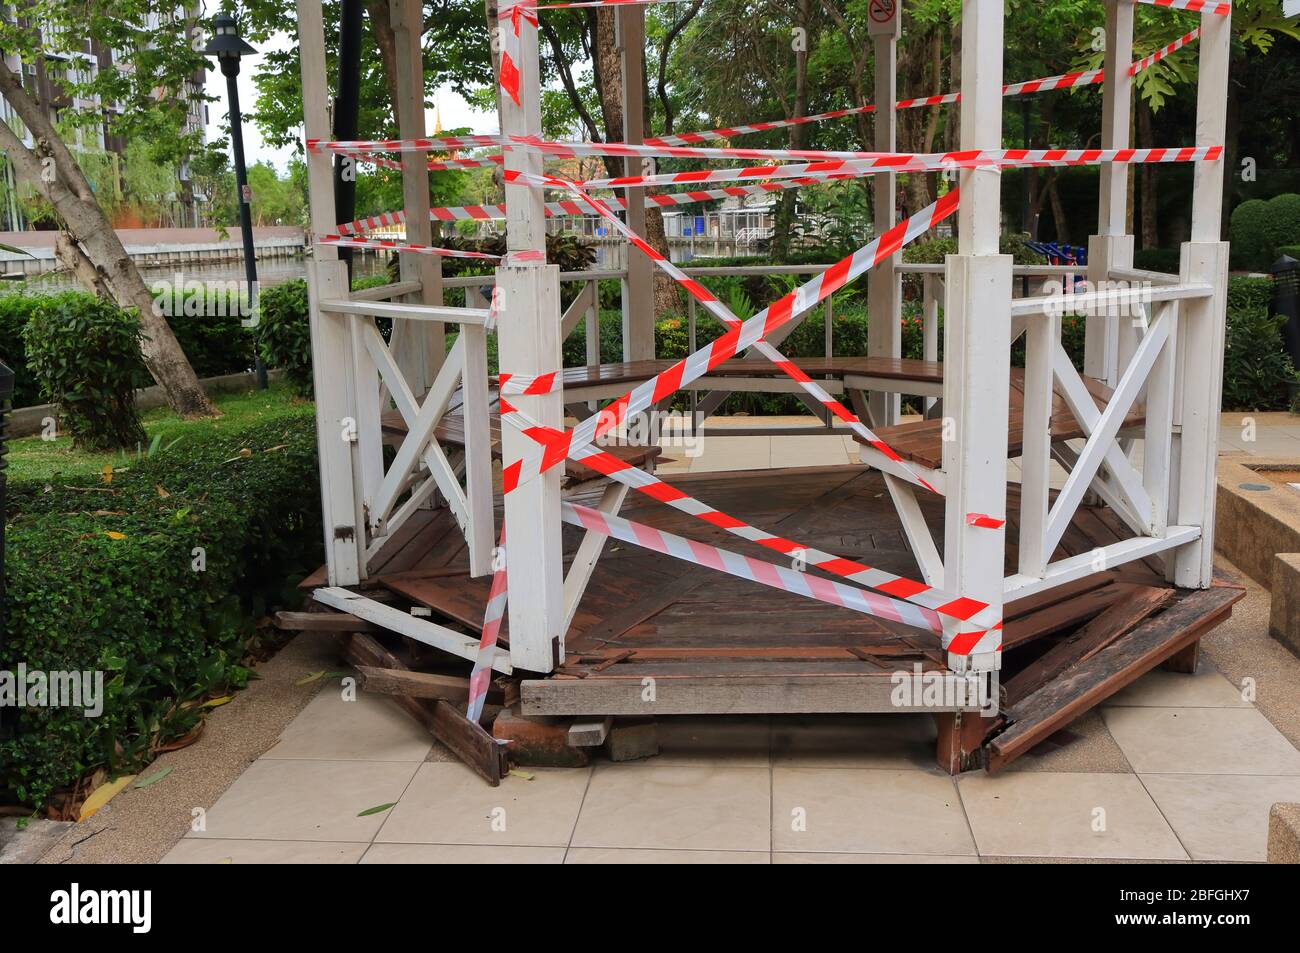 Closeup and focus on barricade tape surrounding the wooden pavilion, people cannot gather, they have to keep social distancing due to coronavirus Stock Photo